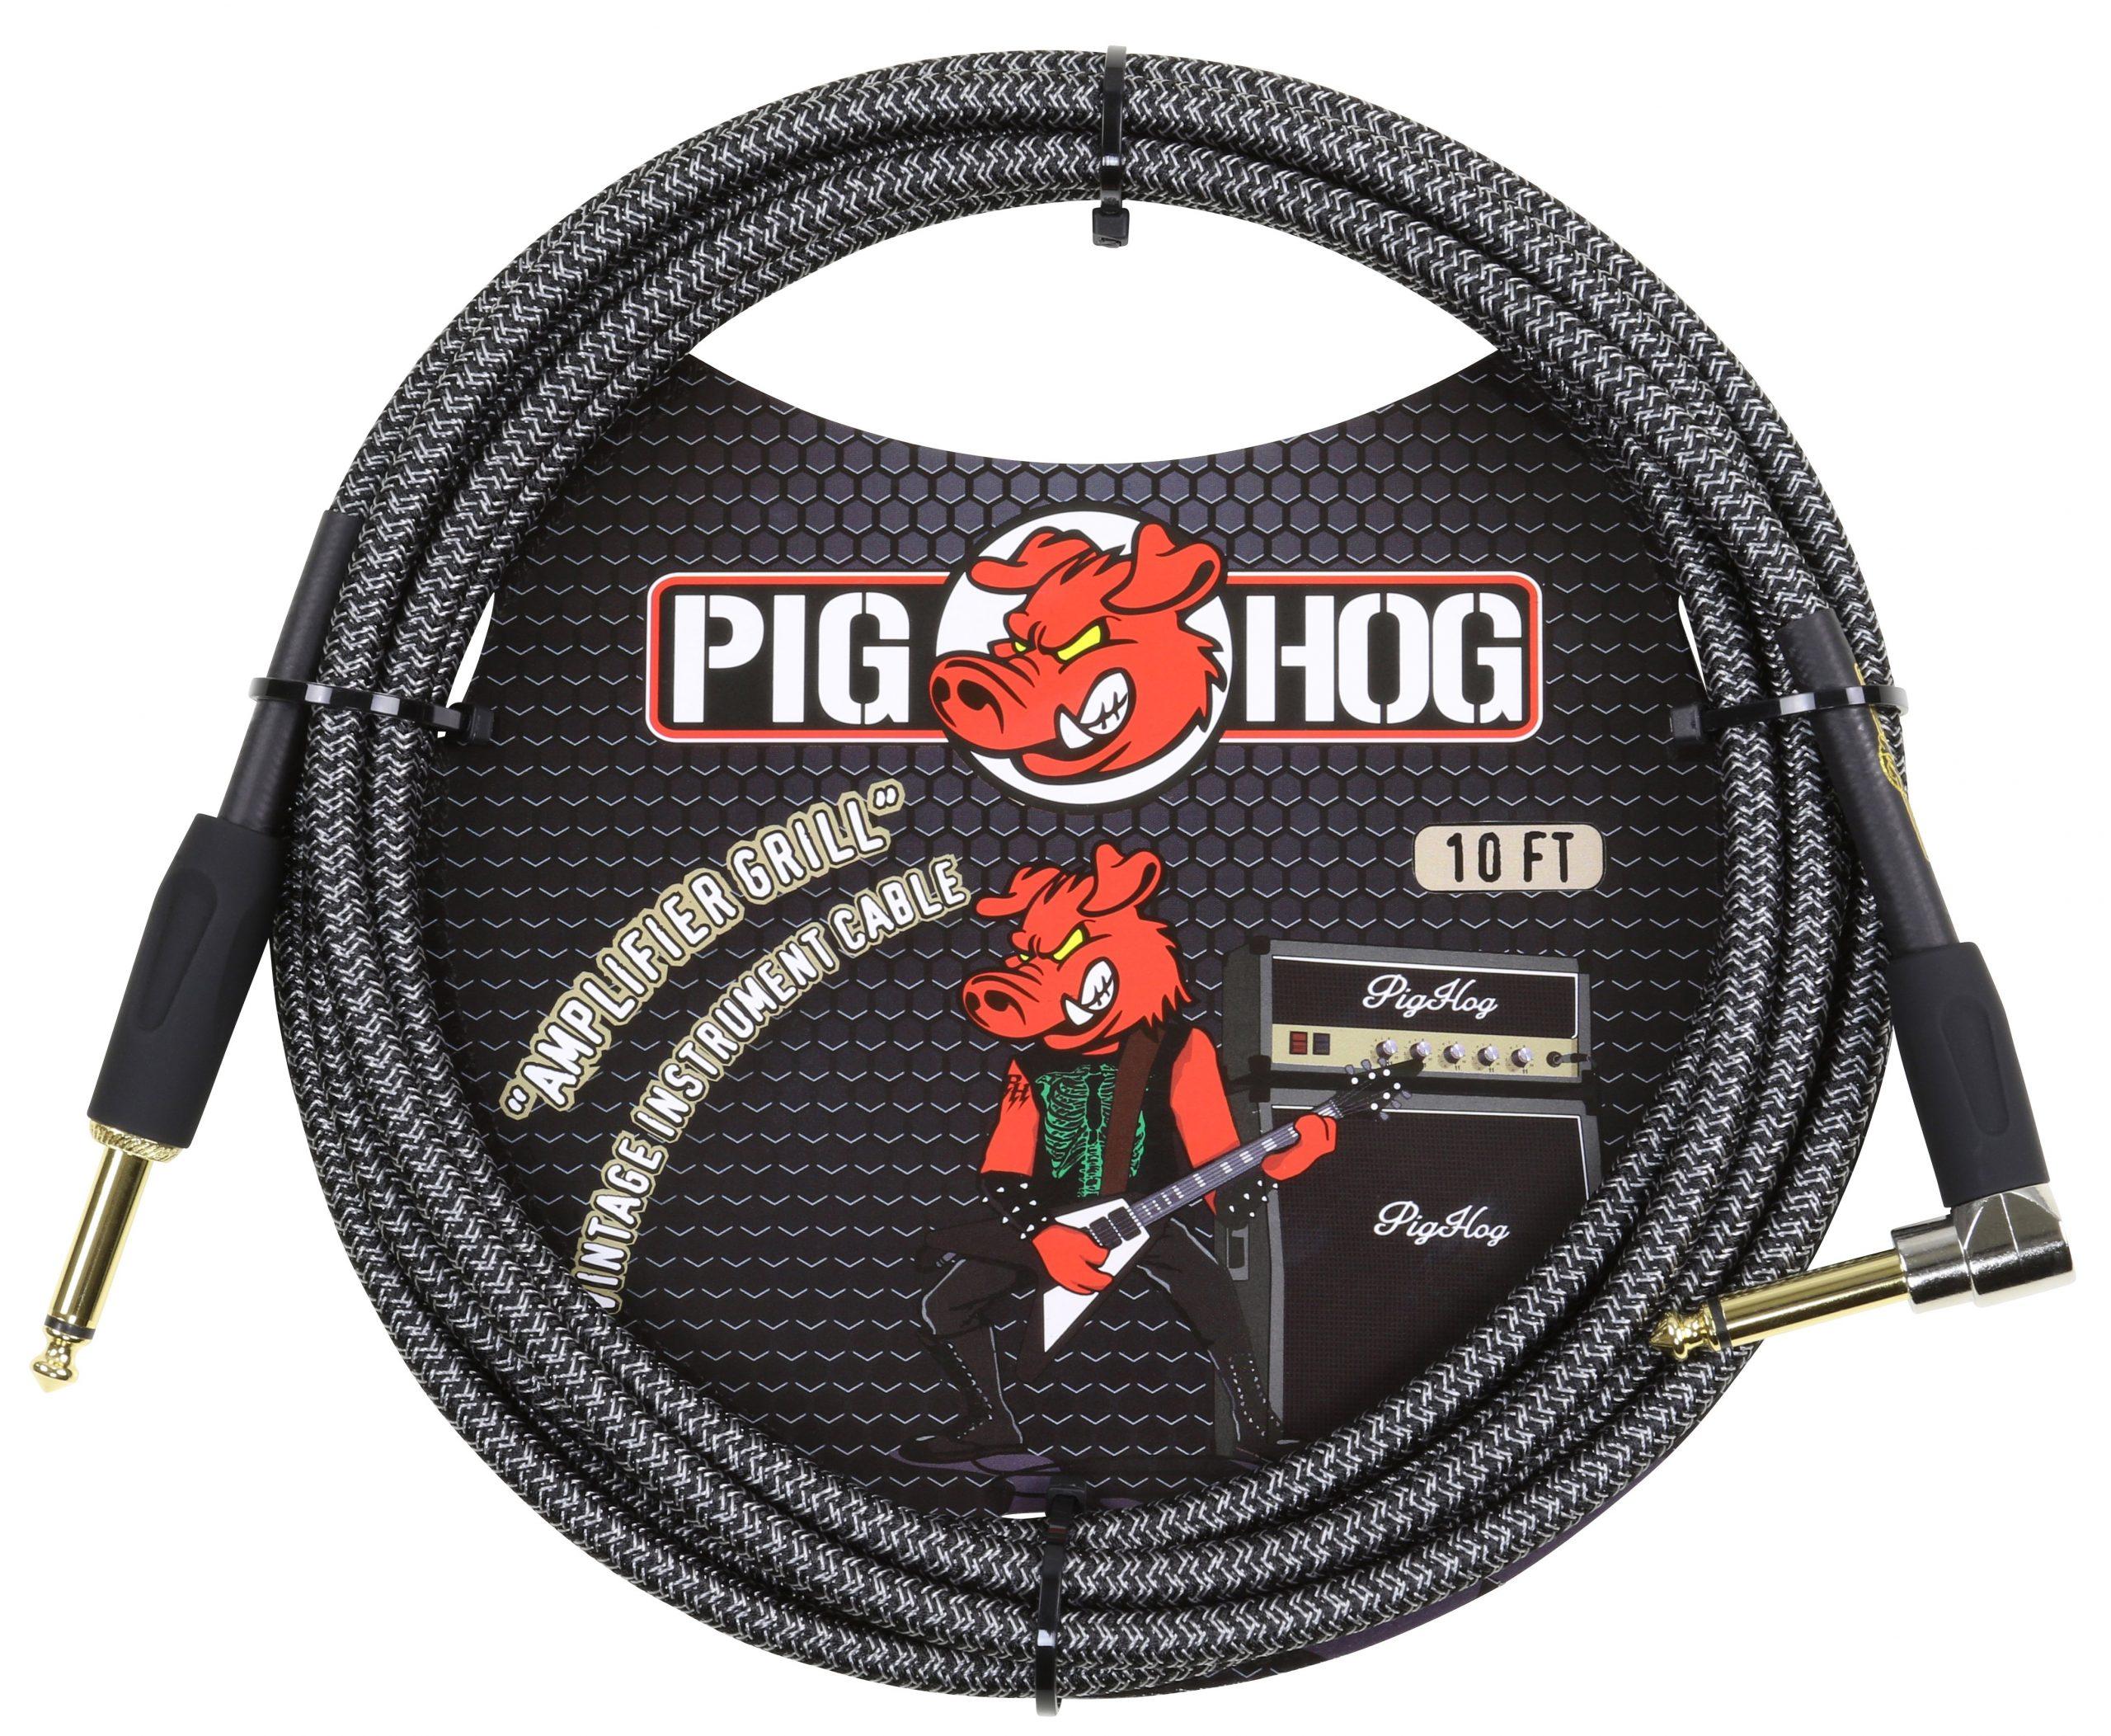 Pig Hog "Amp Grill" Instrument Cable, 10ft Right Angle